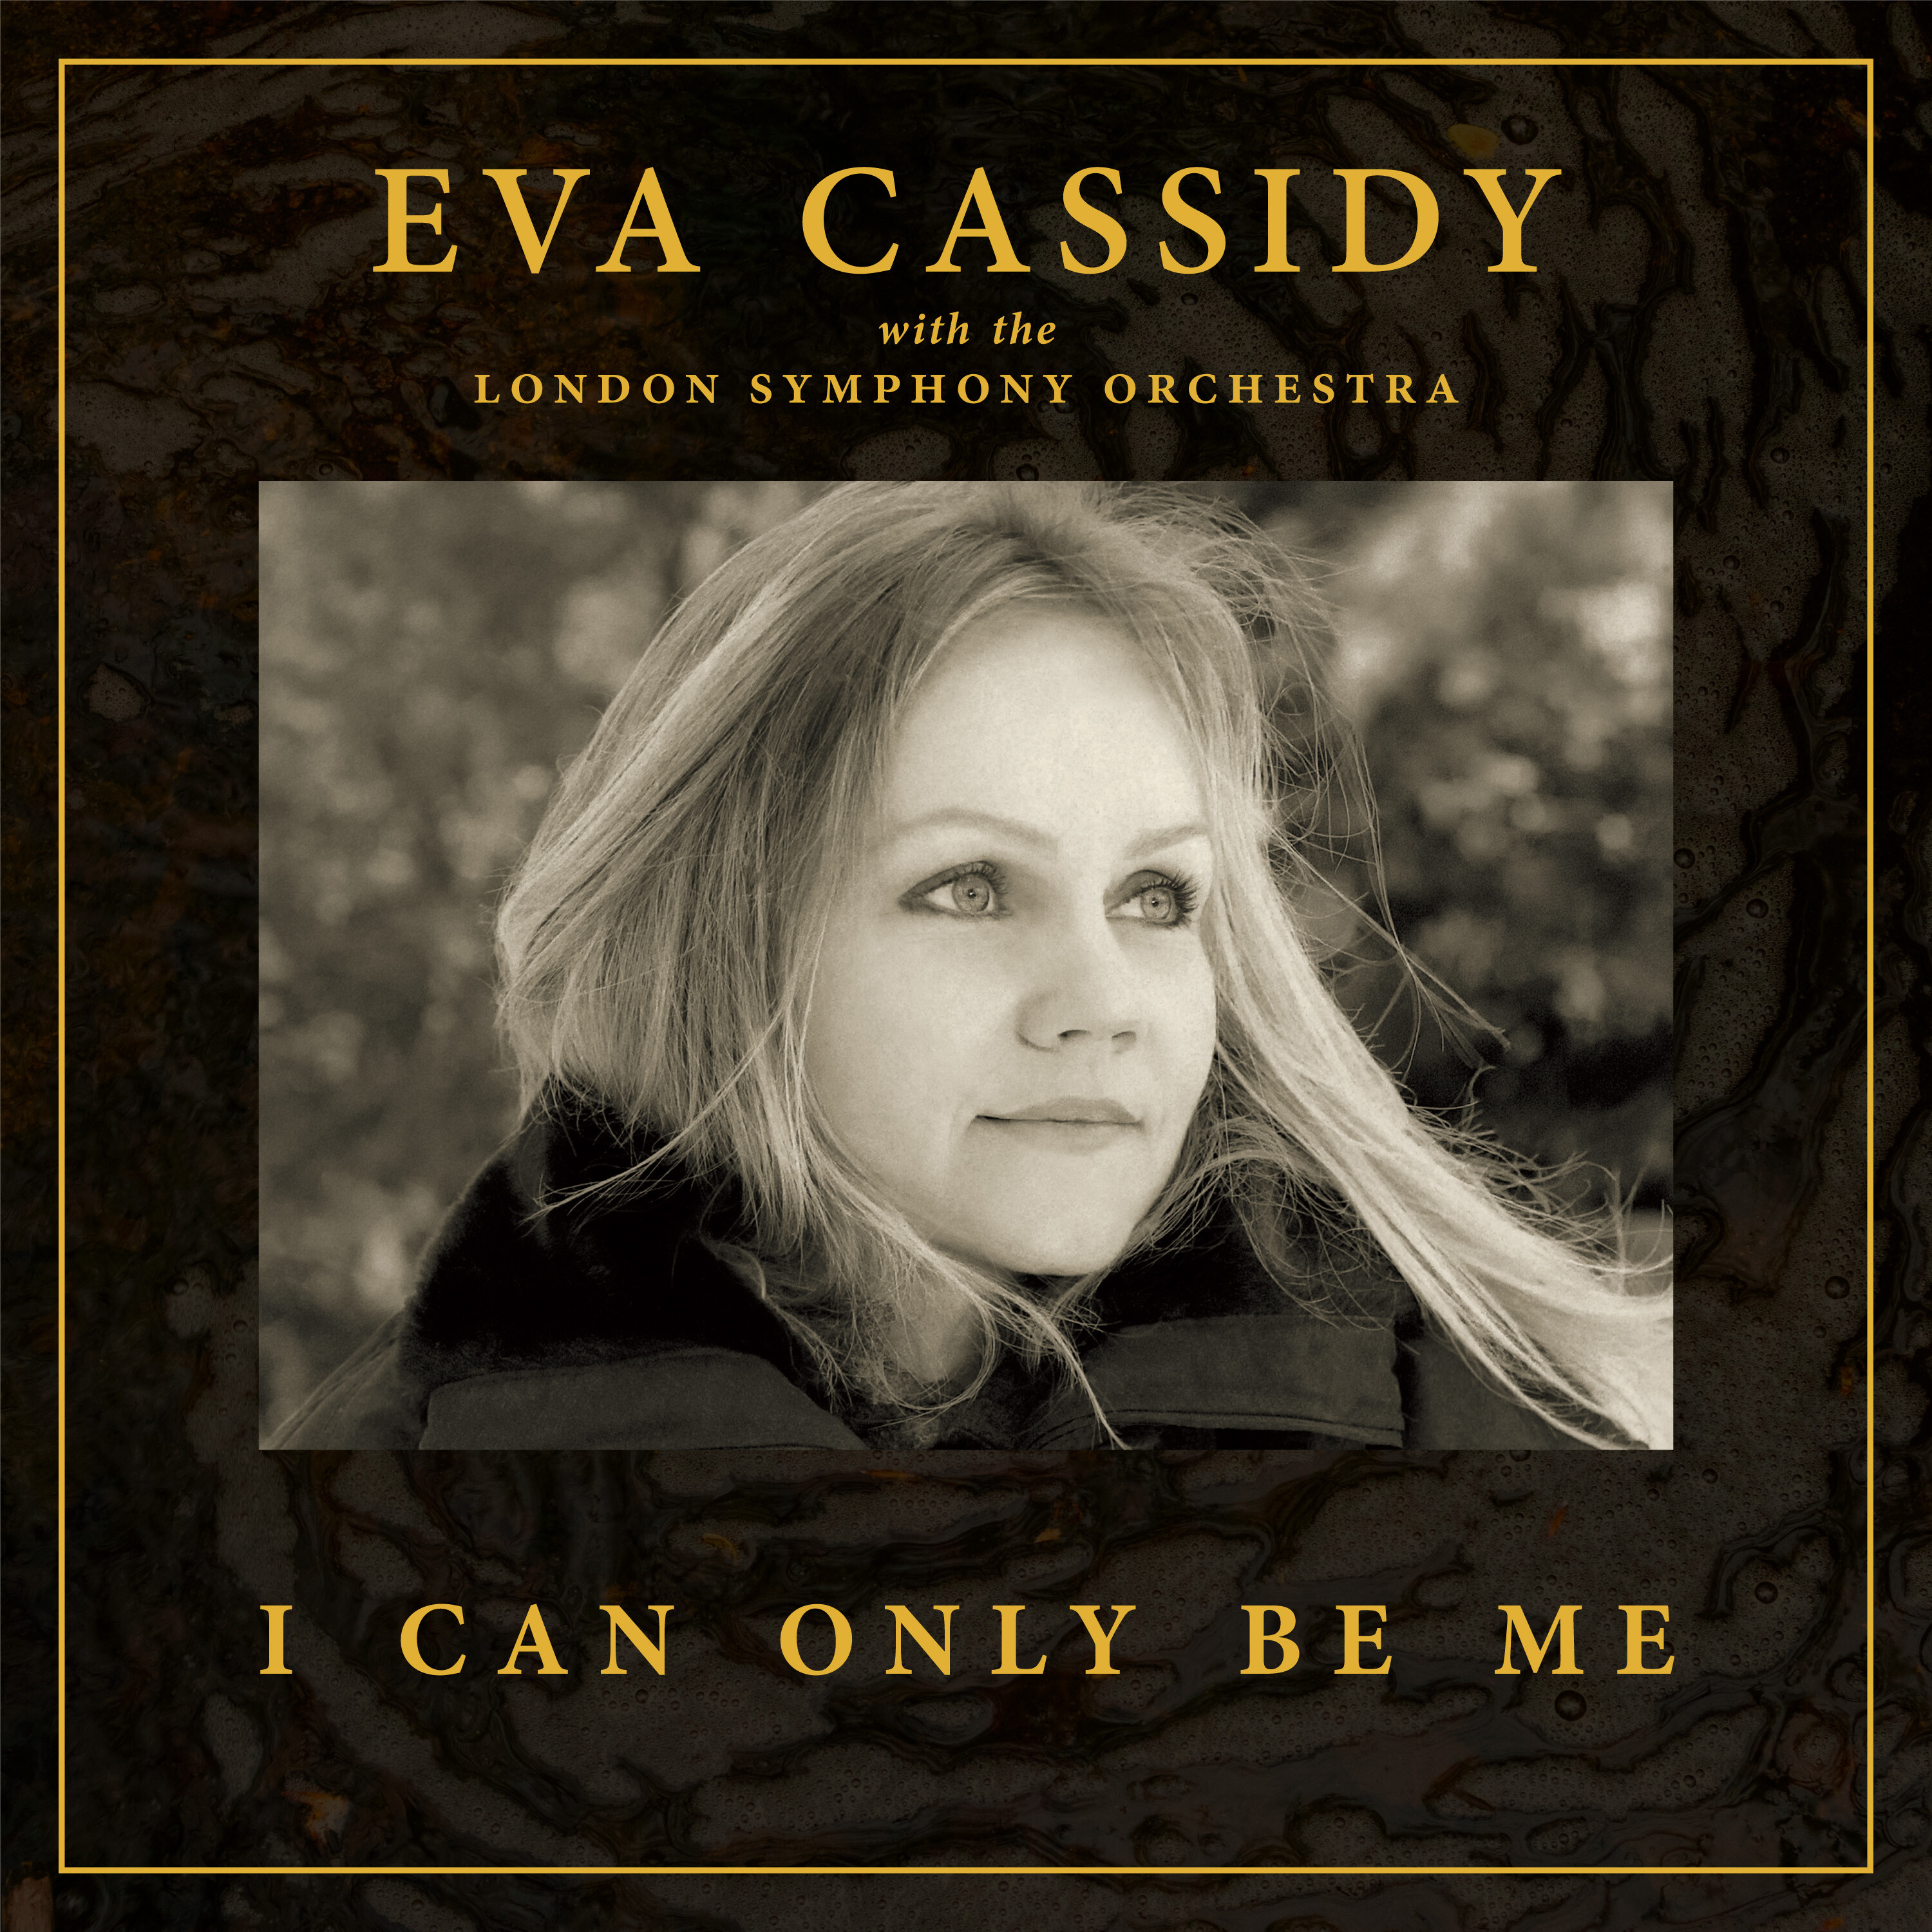 Cassidy Eva (CD) - Me Can Be Only - I